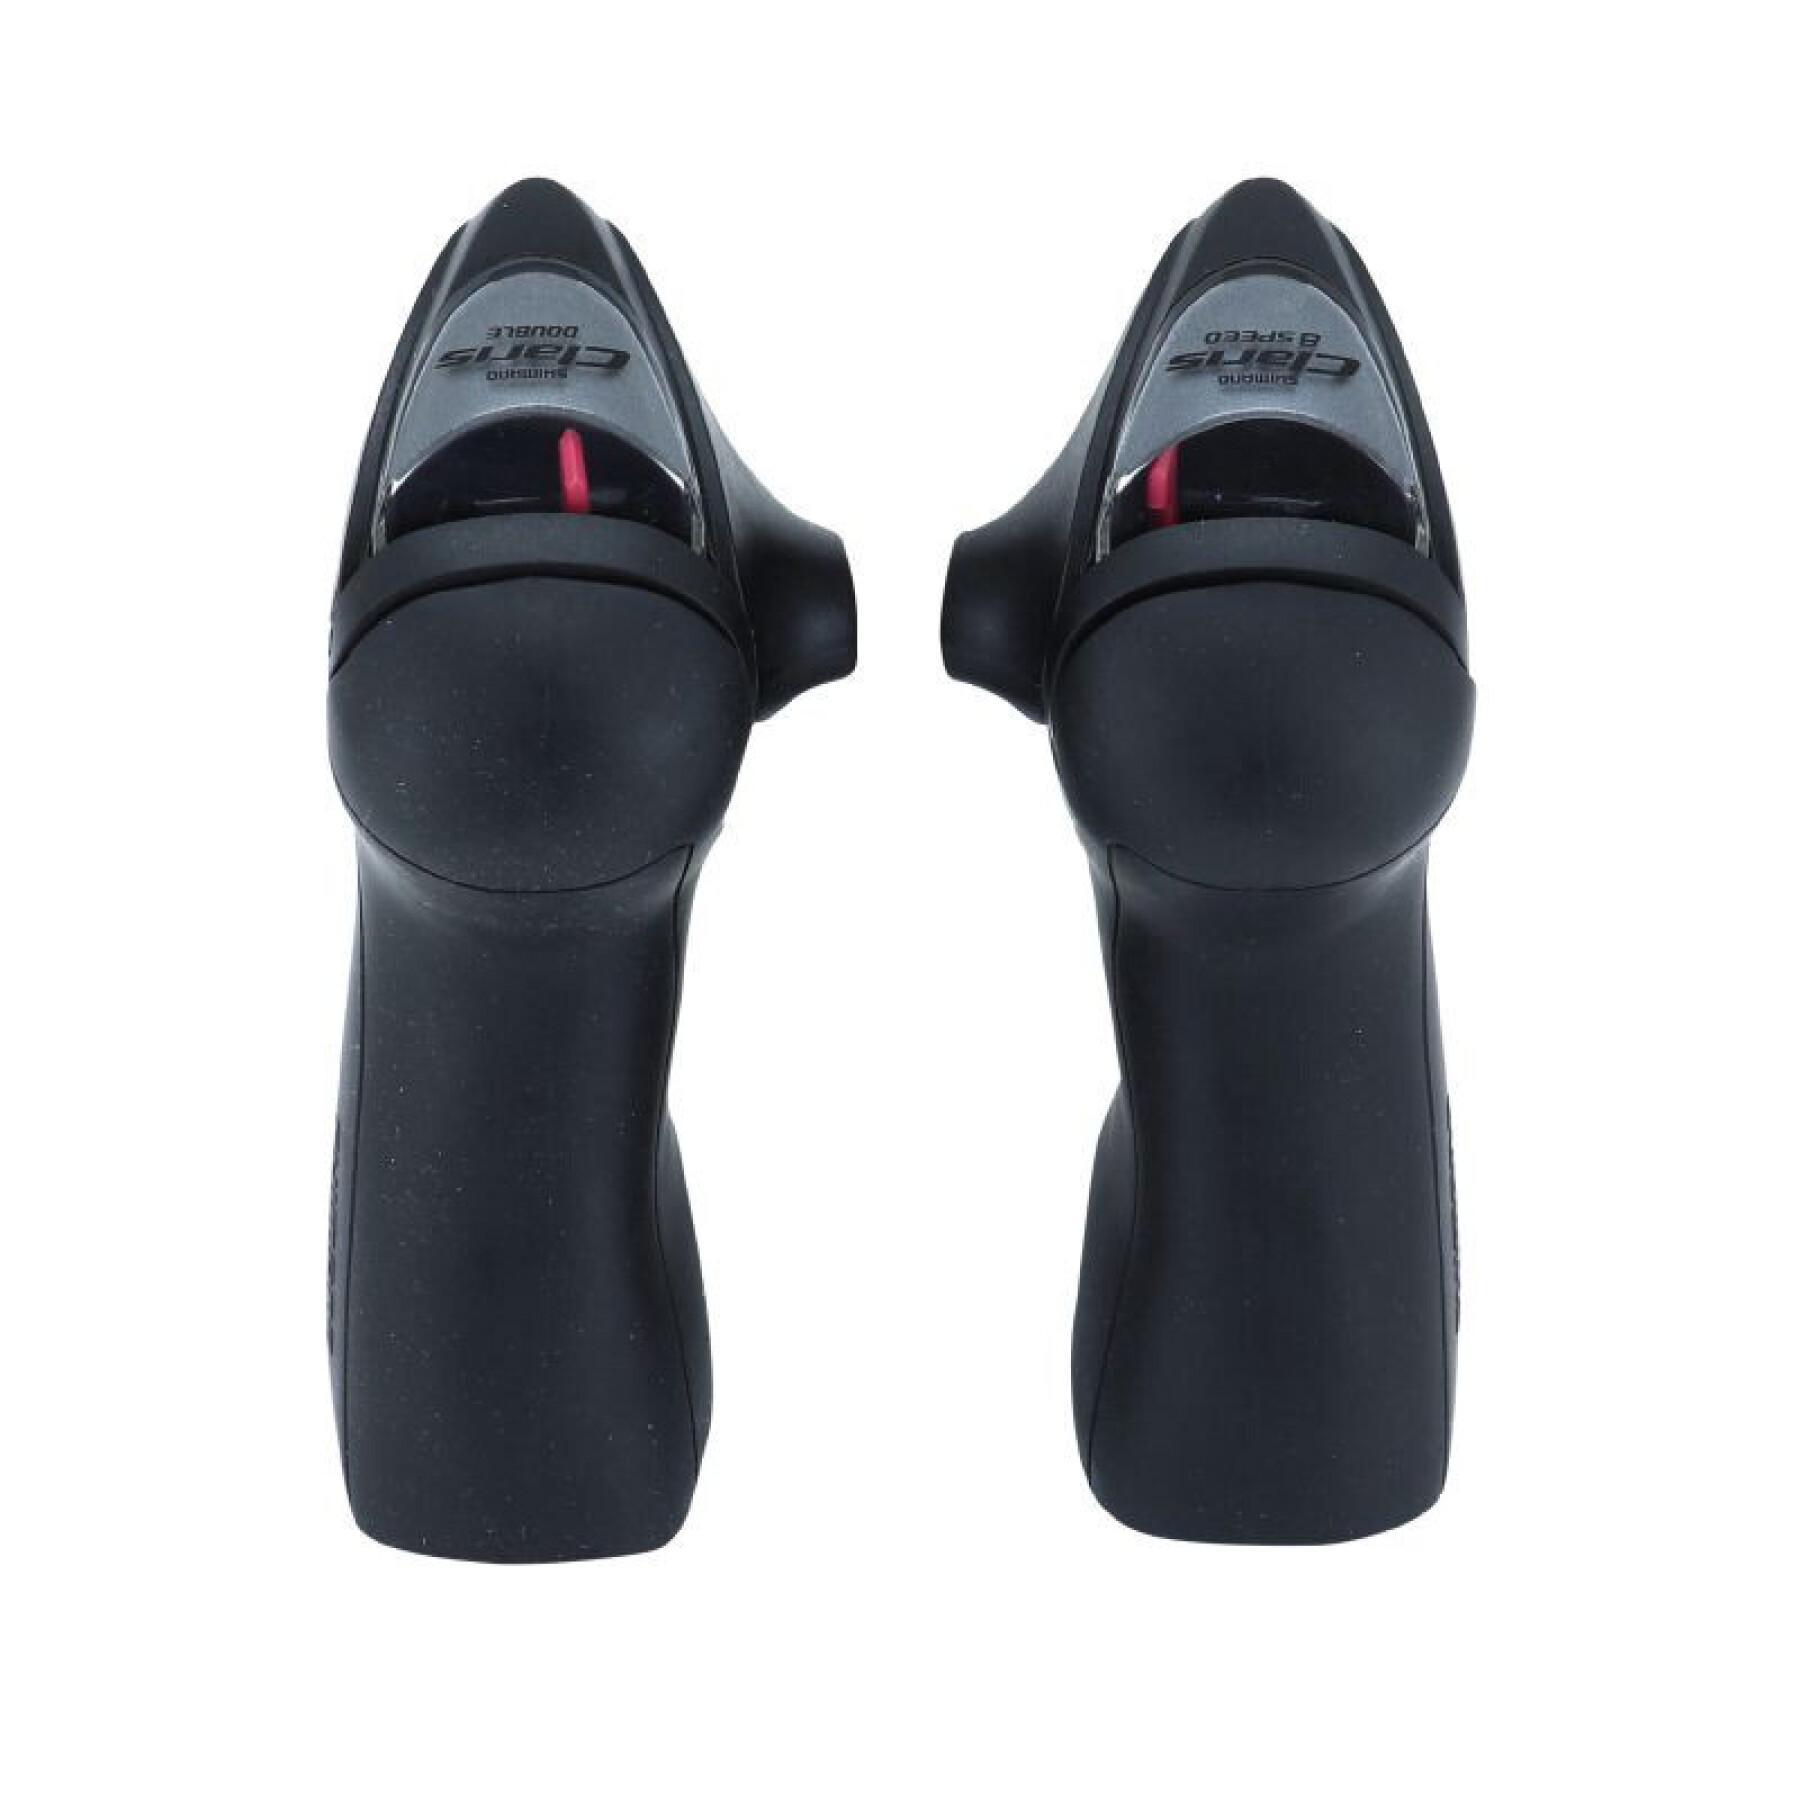 Pair of dual road shifters without transmission Shimano Claris 2400